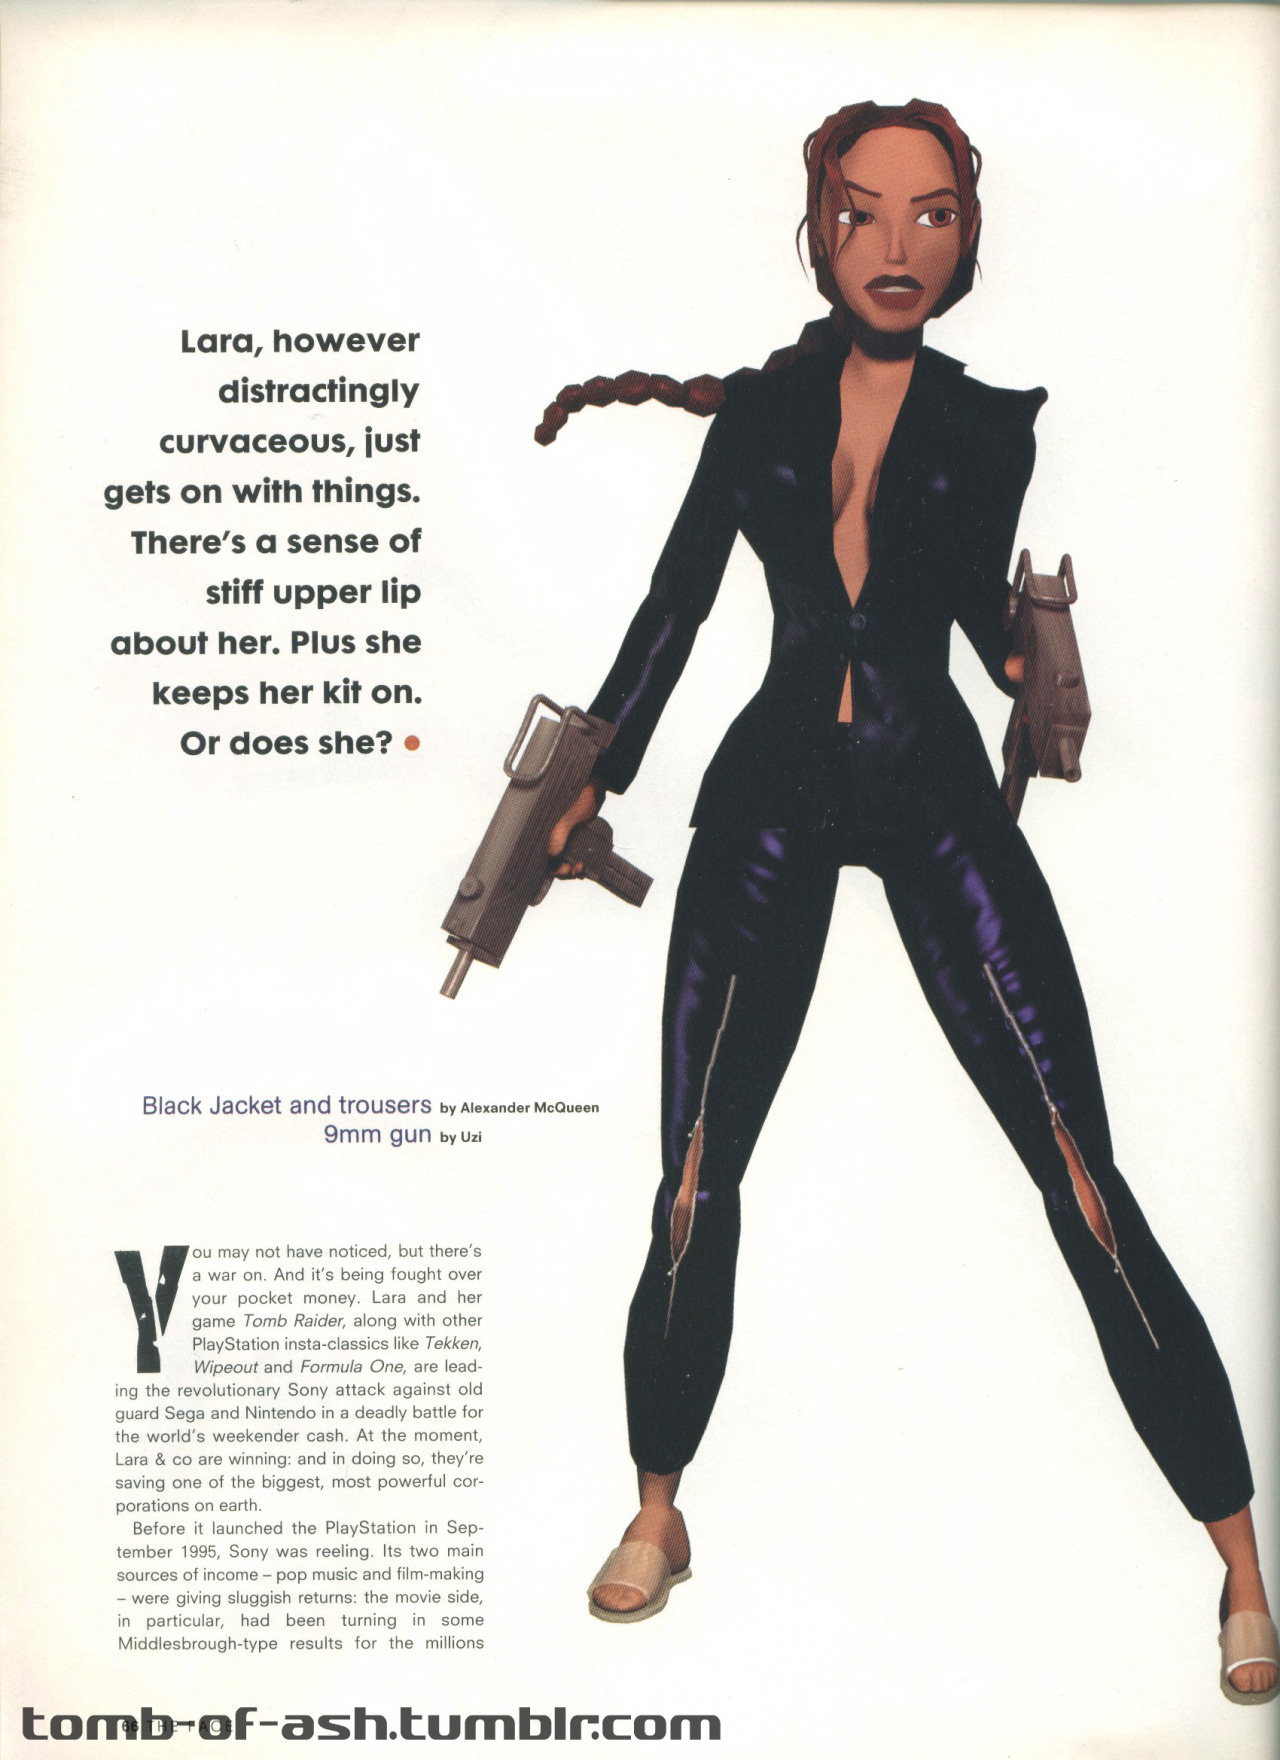 A scan of a page from a Lara Croft feature in British magazine The Face, which shows Lara modeling a designer outfit that probably is not very good for tomb raiding.